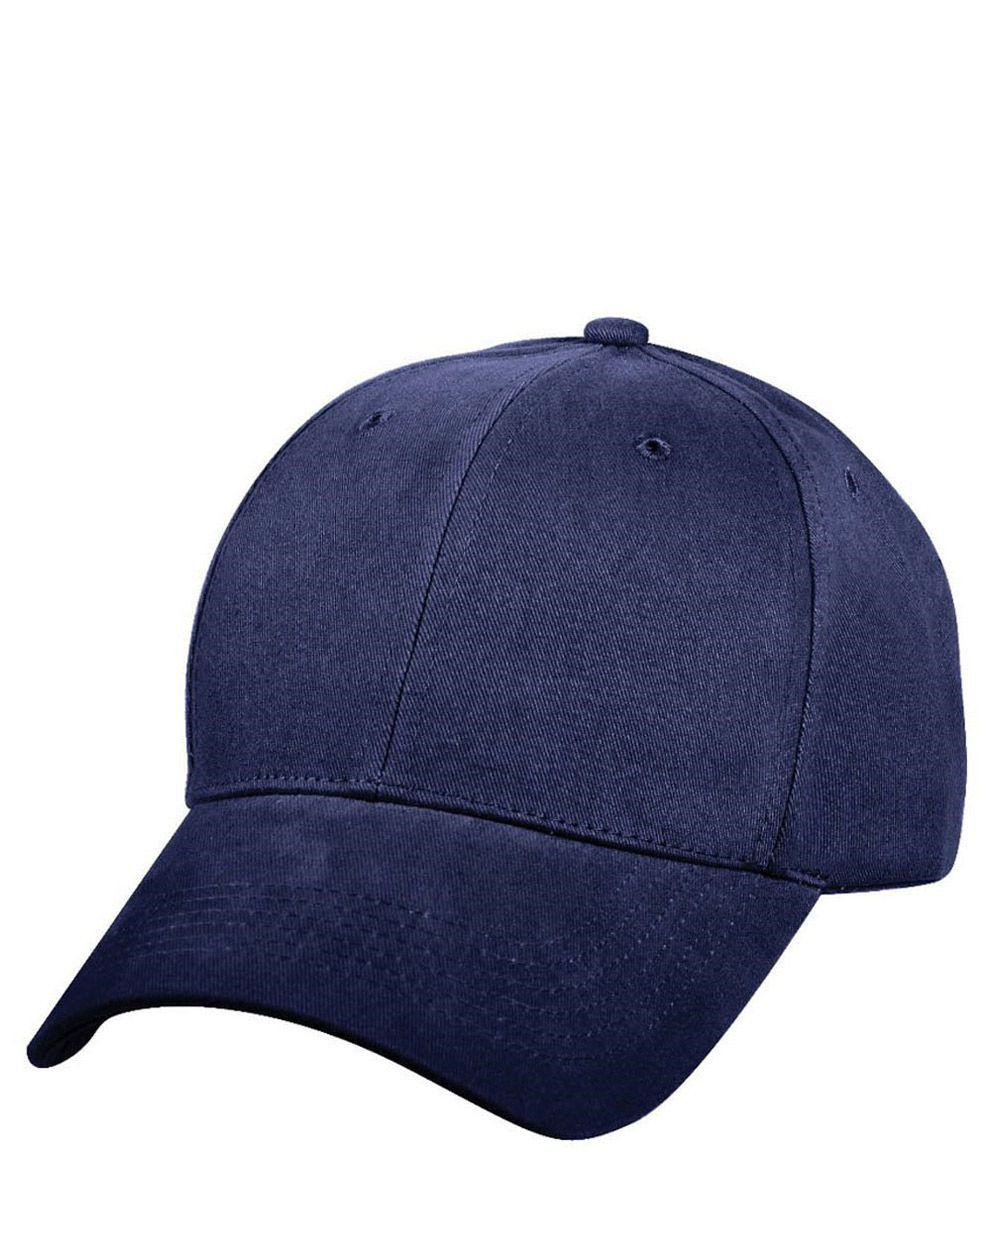 Rothco Low Profile Baseball Cap (Navy, One Size)